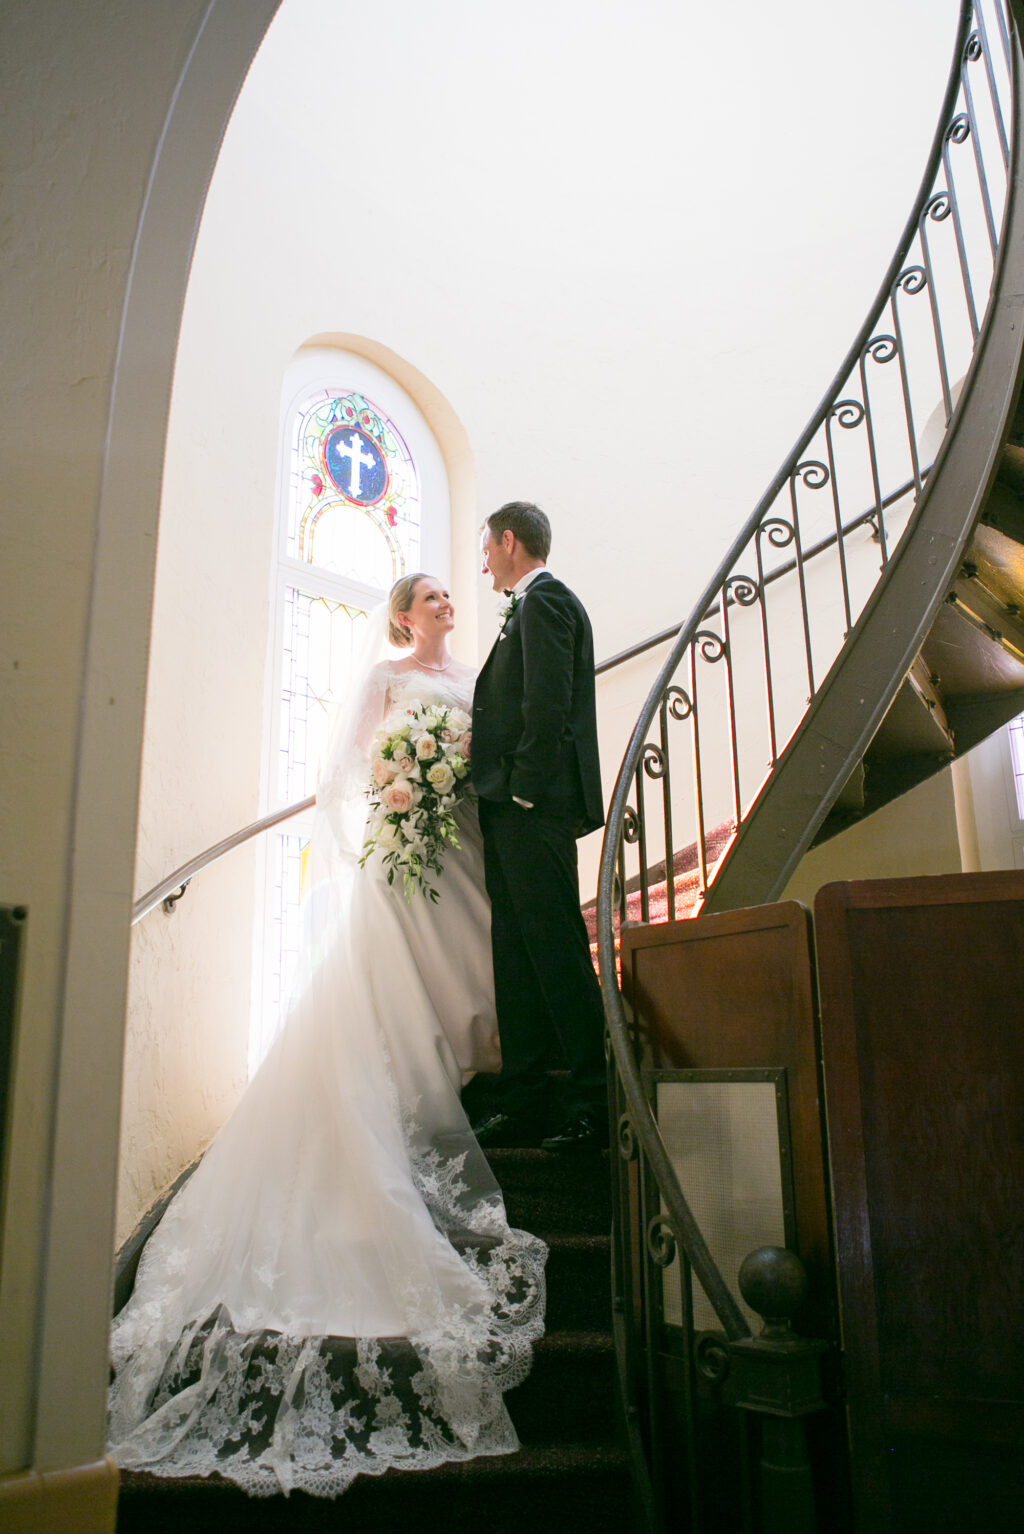 Intimate Bride and Groom Stairs Wedding Portrait | Tampa Bay Photographer Carrie Wildes Photography